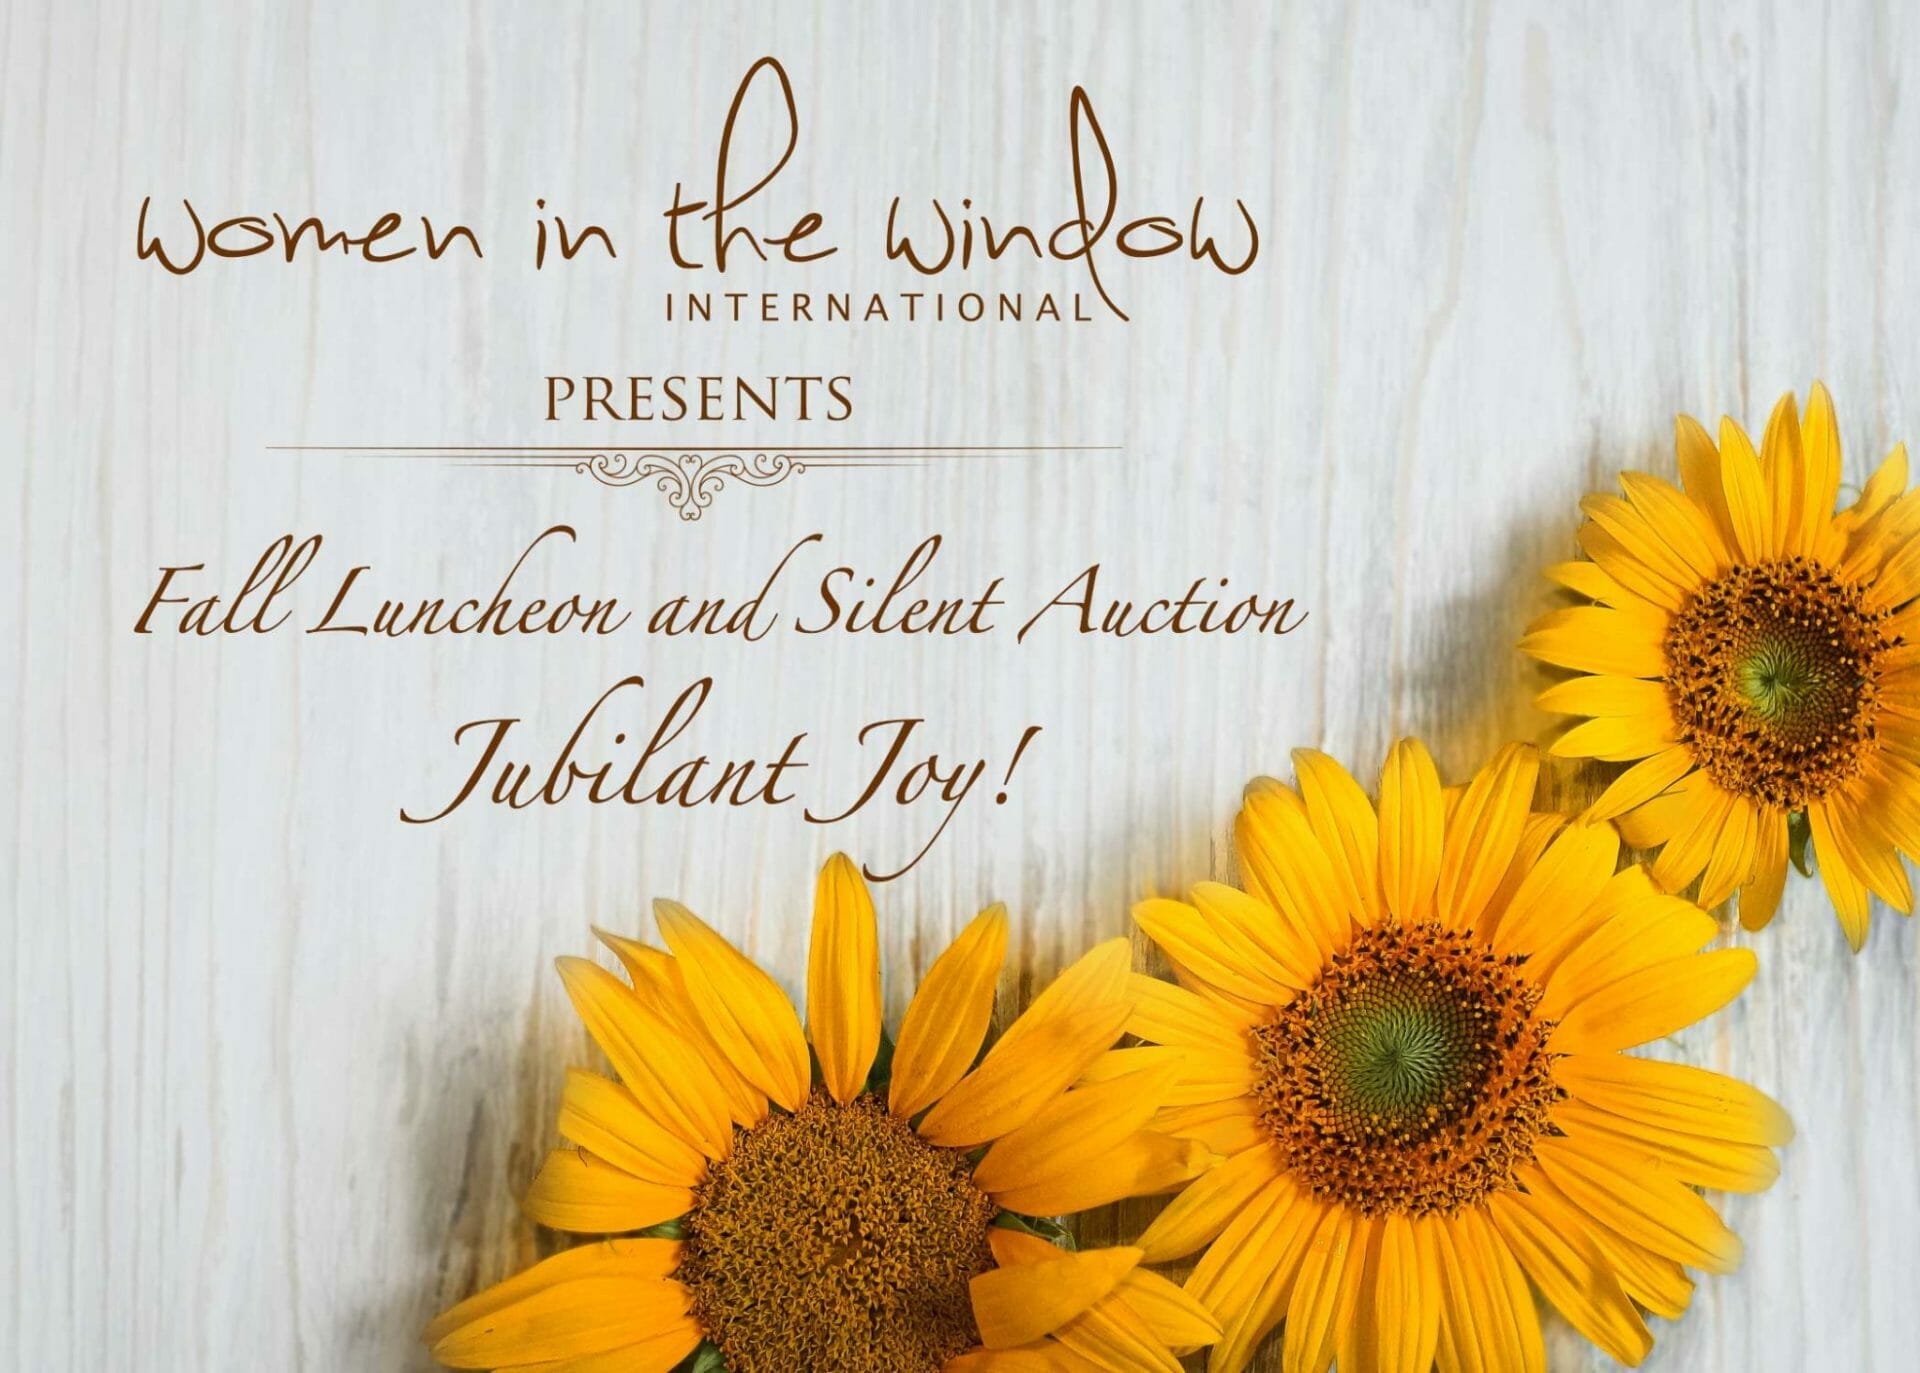 Fall Luncheon & Silent Auction